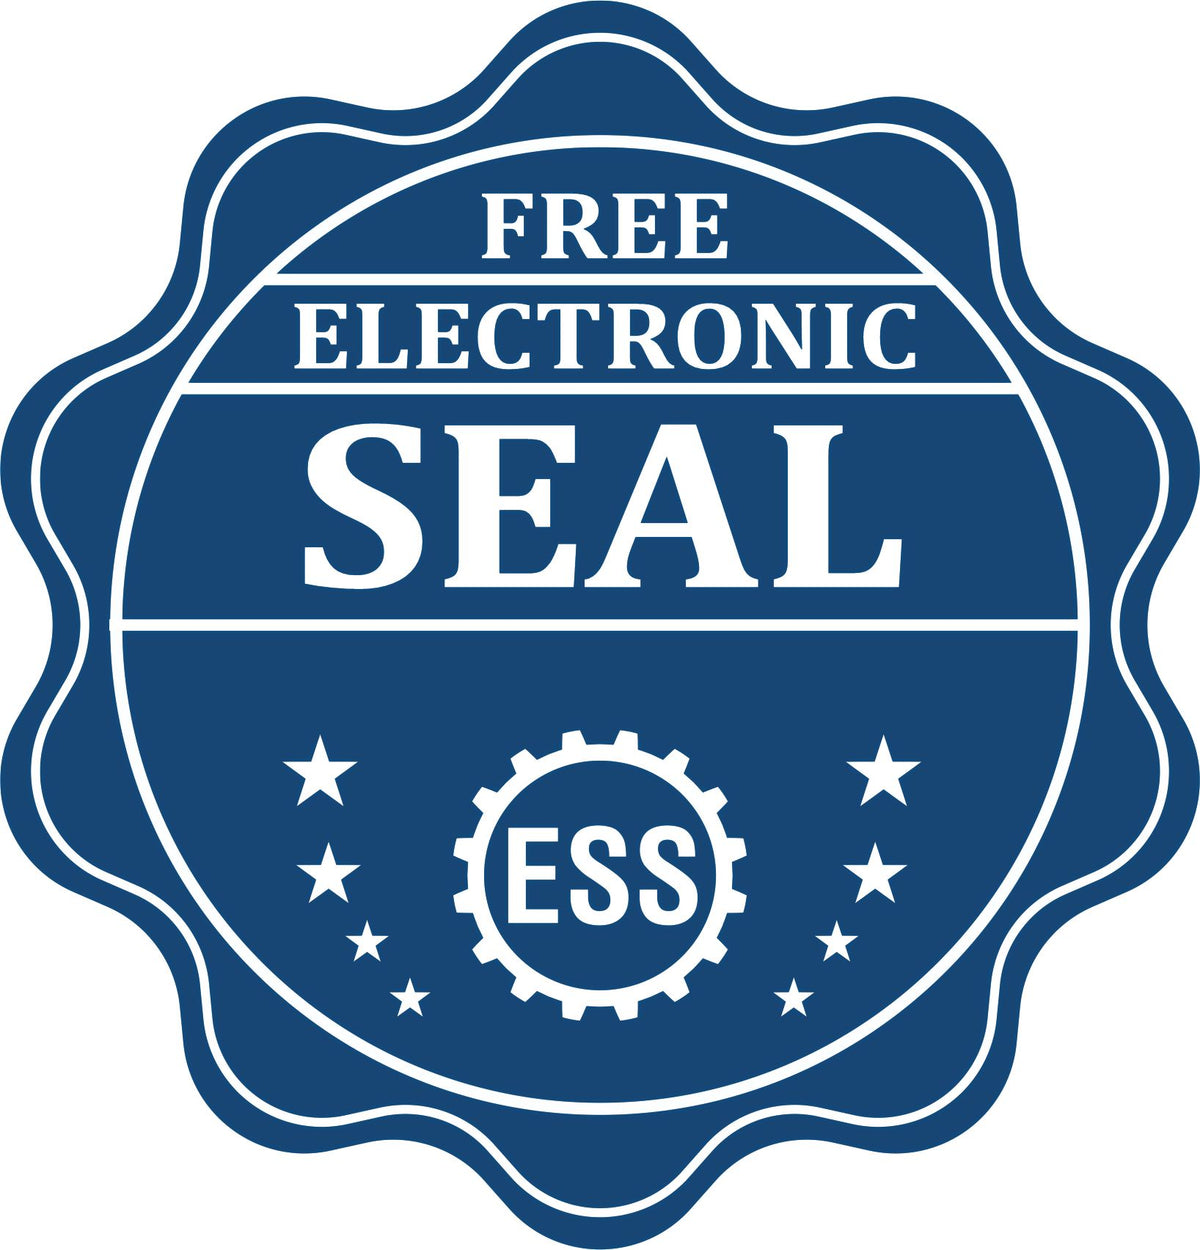 A badge showing a free electronic seal for the Hybrid New Jersey Architect Seal with stars and the ESS gear on the emblem.